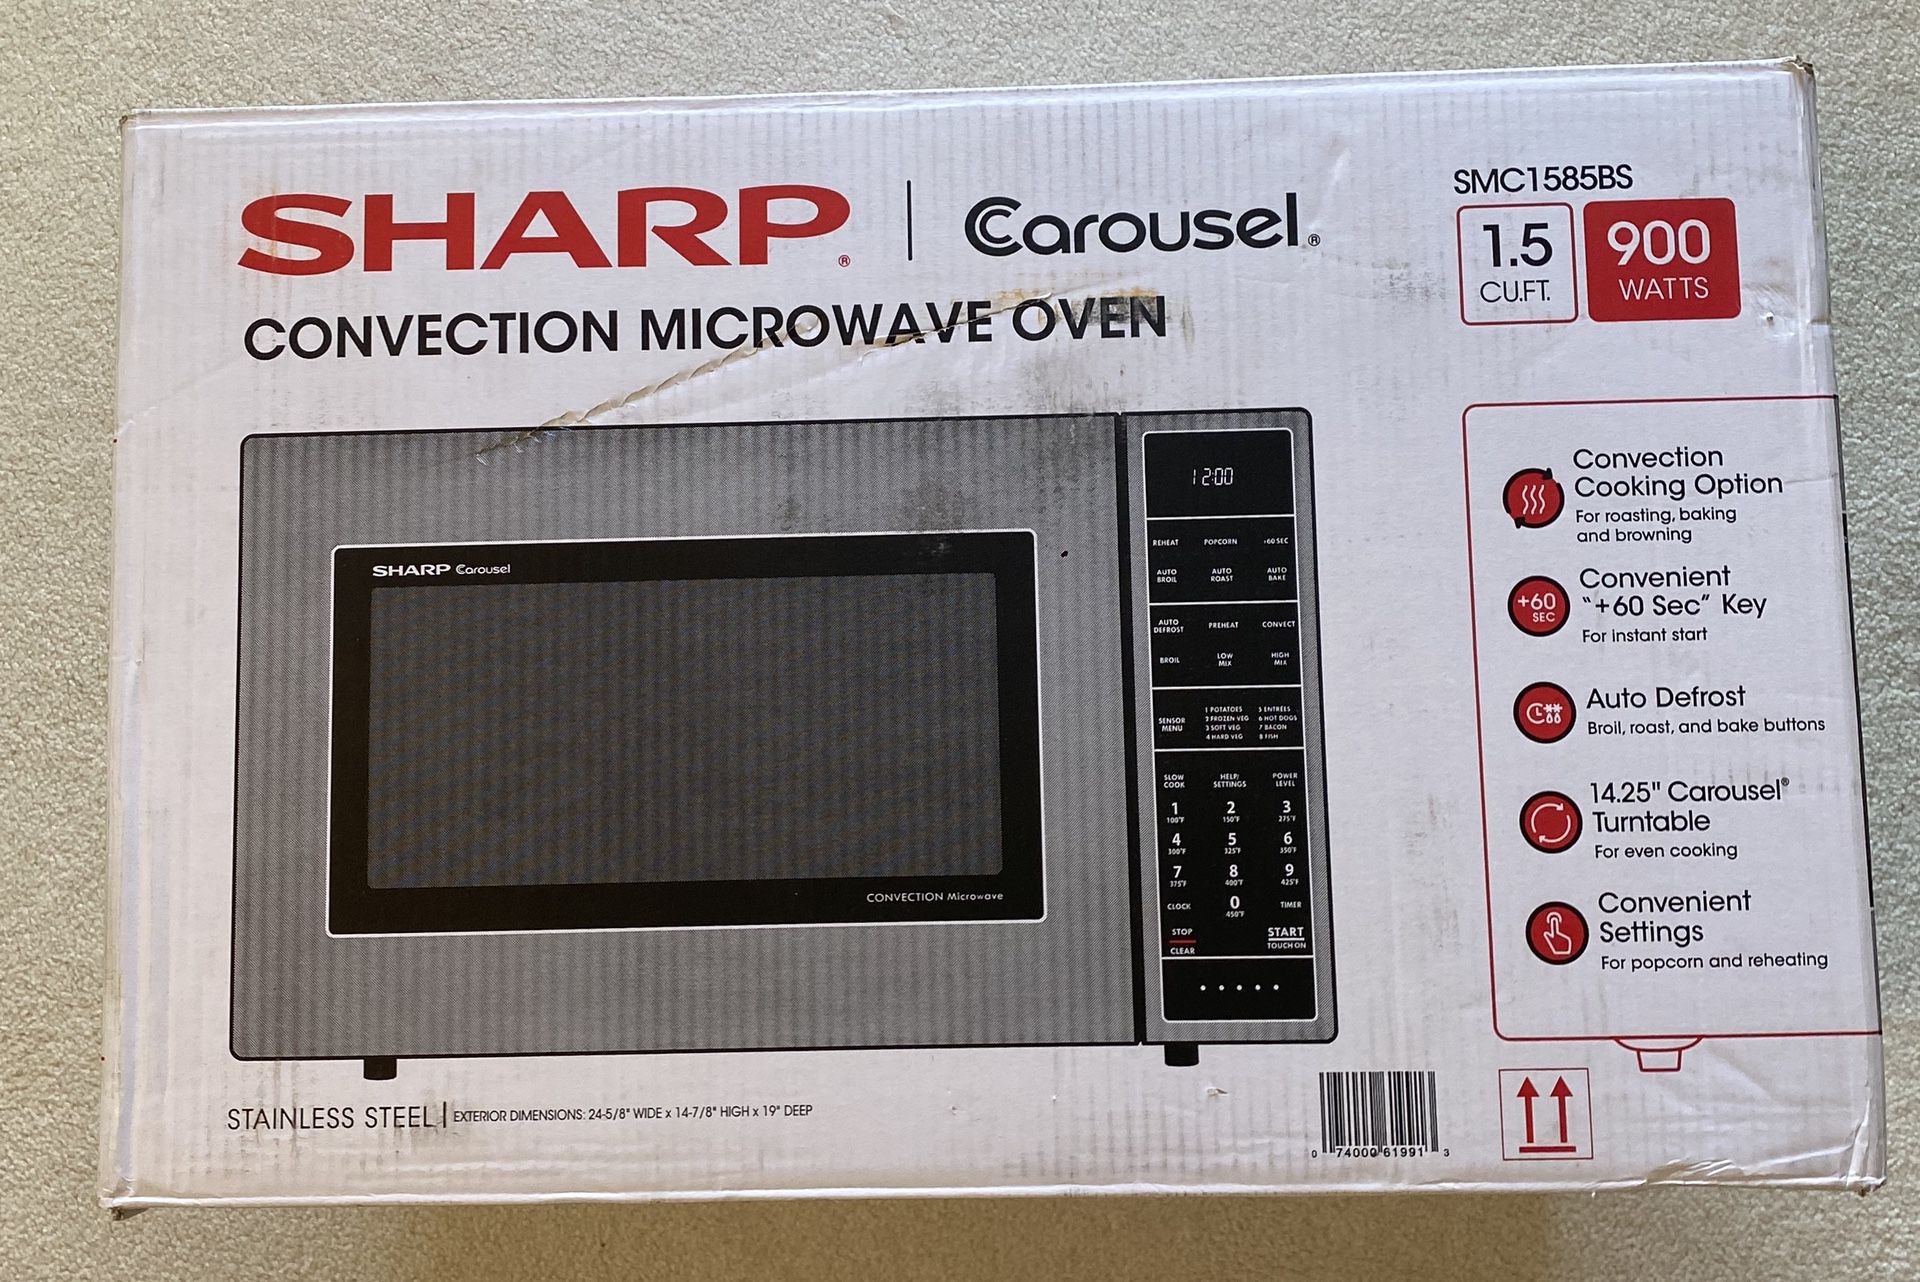 Sharp convection microwave oven